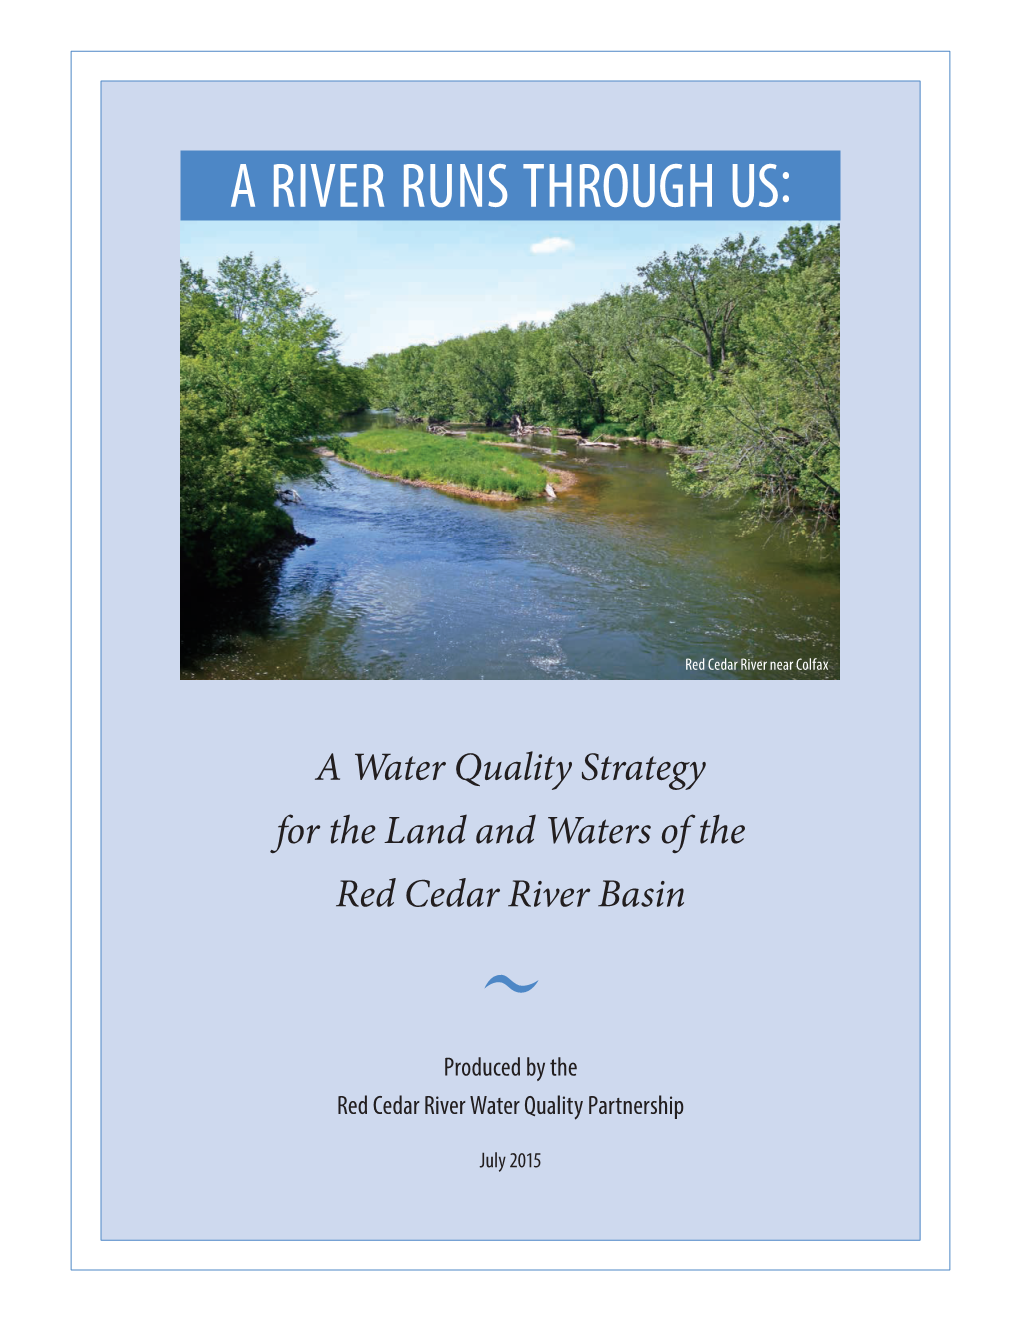 A River Runs Through Us: a Water Quality Strategy for the Land and Waters of the Red Cedar River Basin Chapter 1